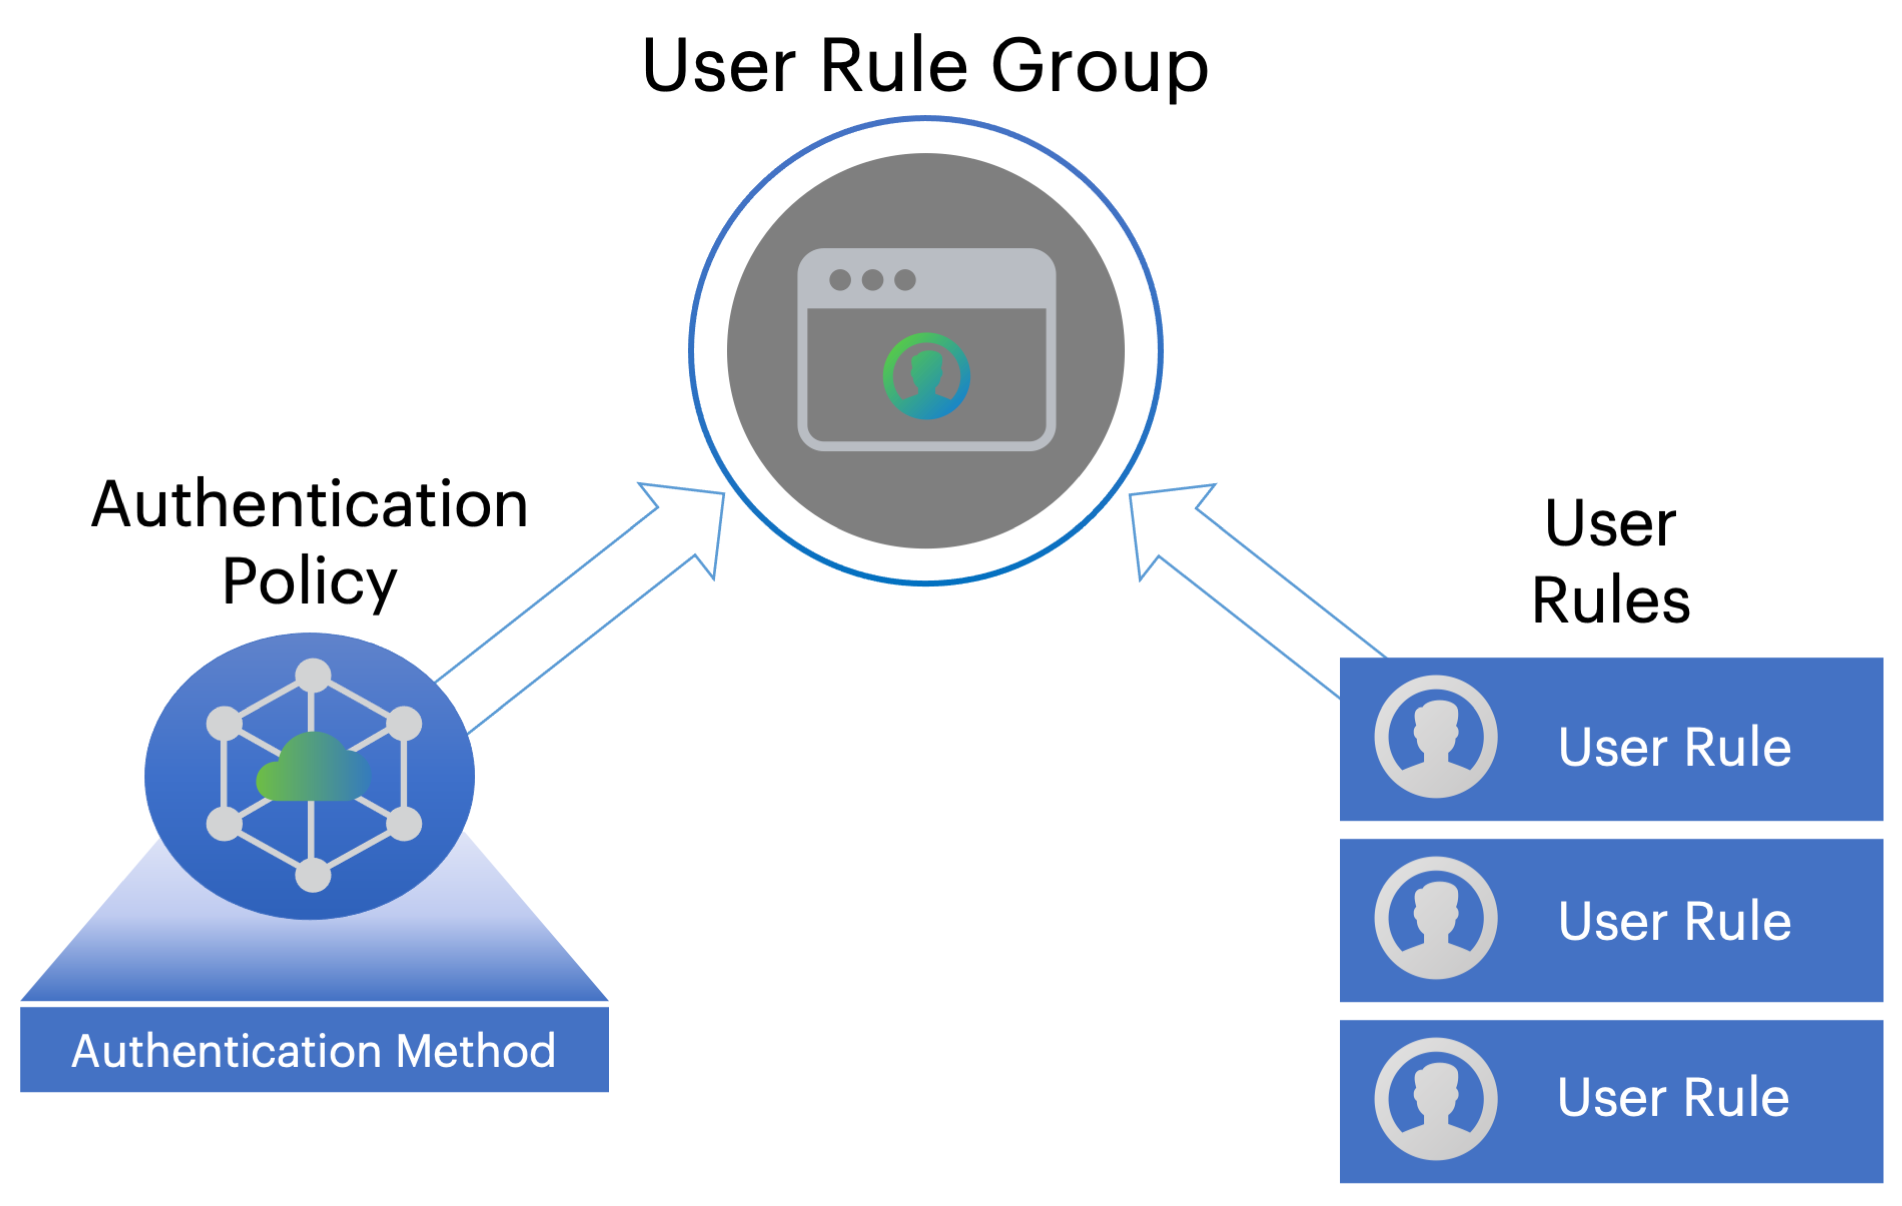 The relationship between user groups, rules, authentication policies and methods